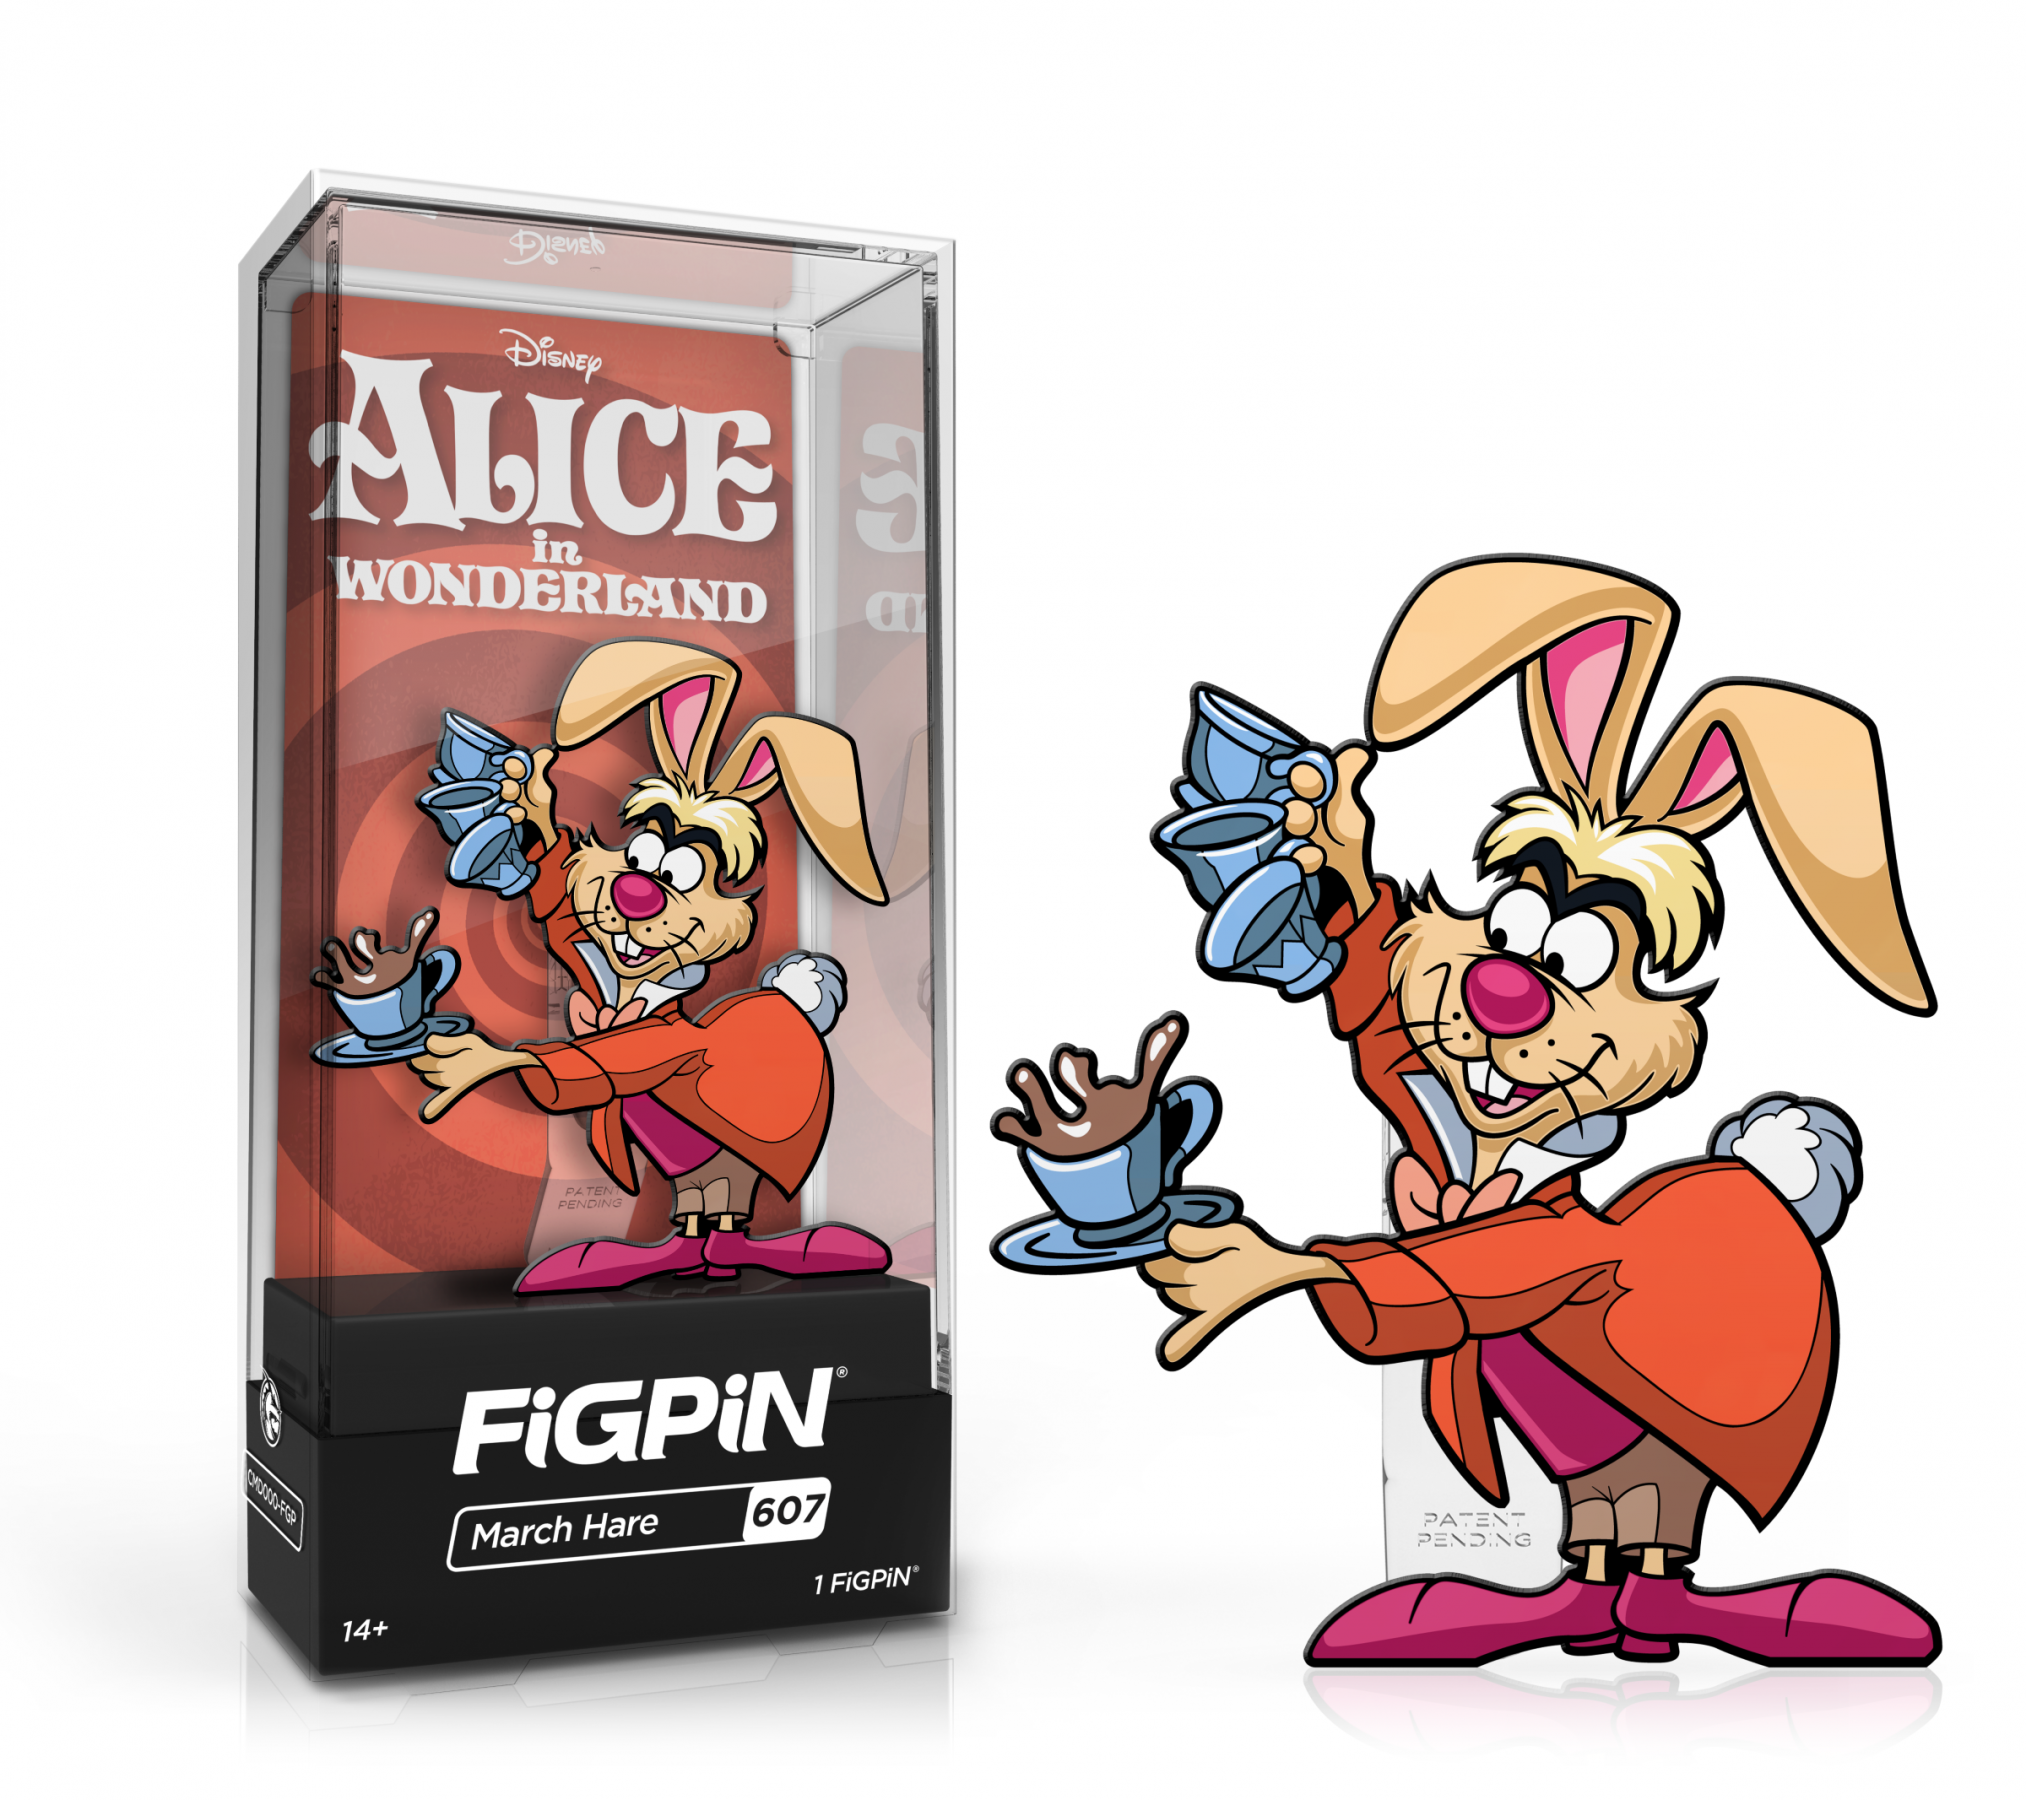 FiGPiN March Hare (607) Collectable Enamel Pin MKATC0AZD0 |27882|